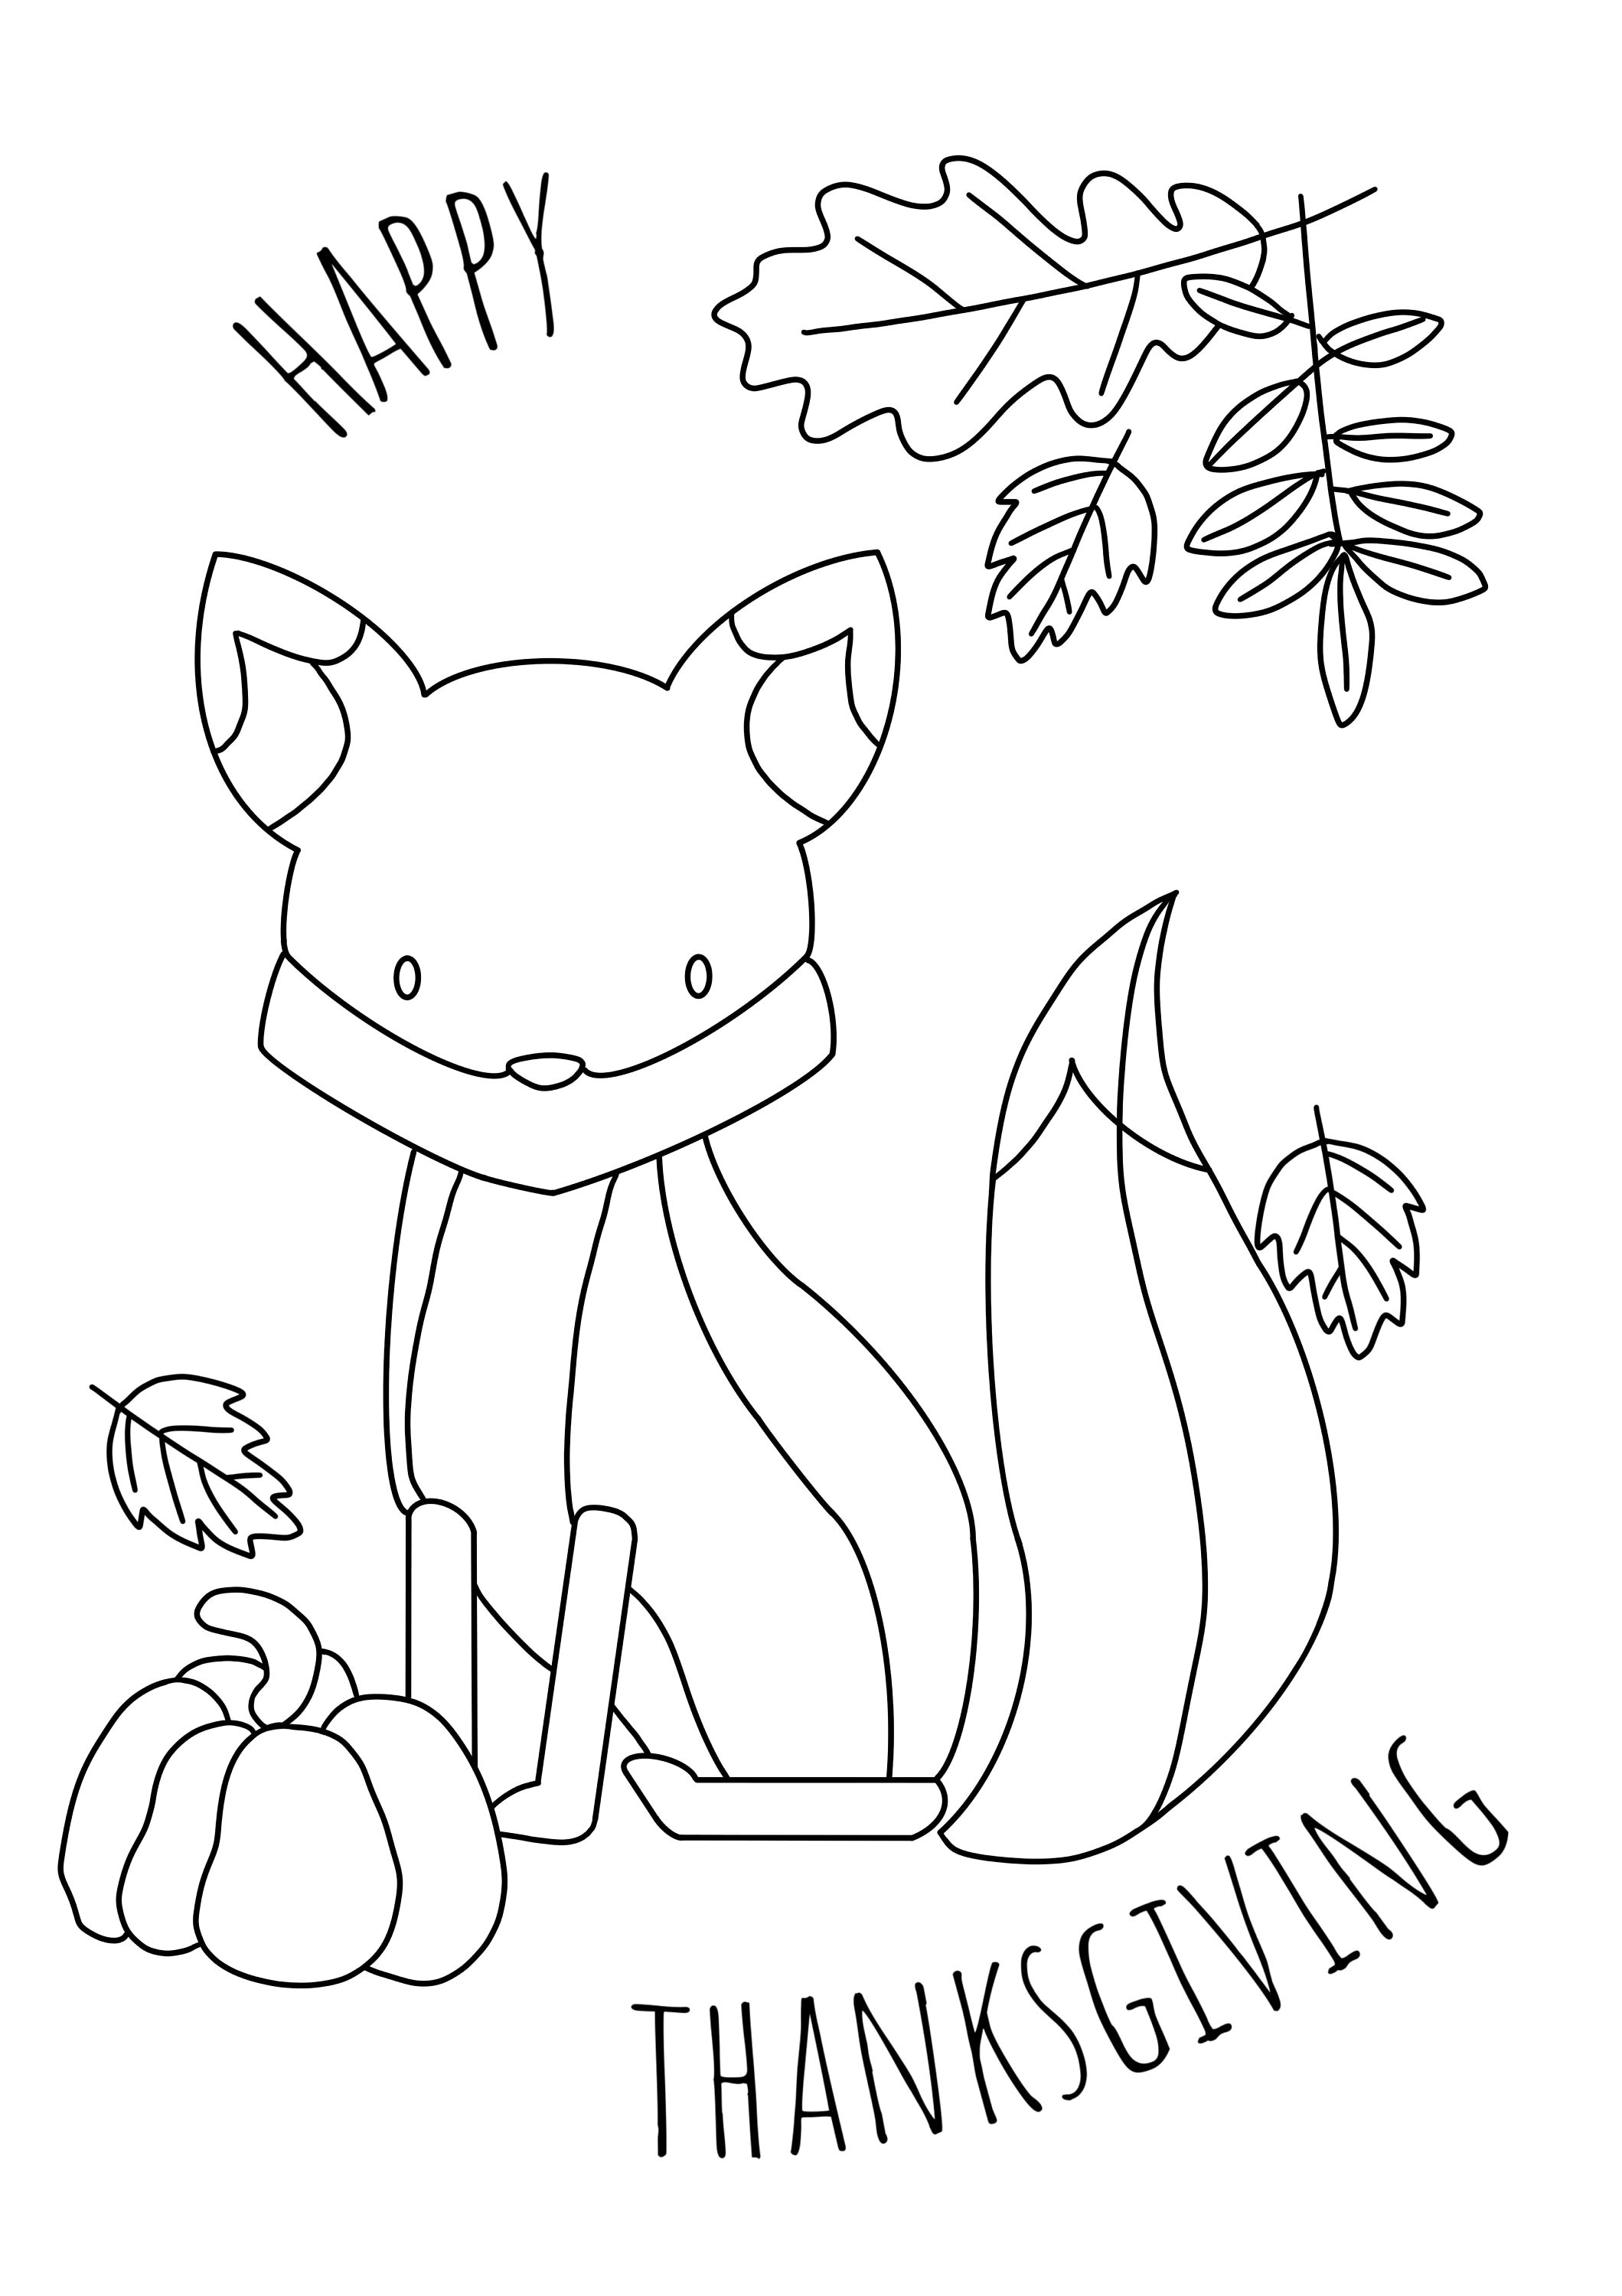 Thanksgiving coloring page kids coloring coloring page kids thanksgiving printable color page printable thanksgiving activity